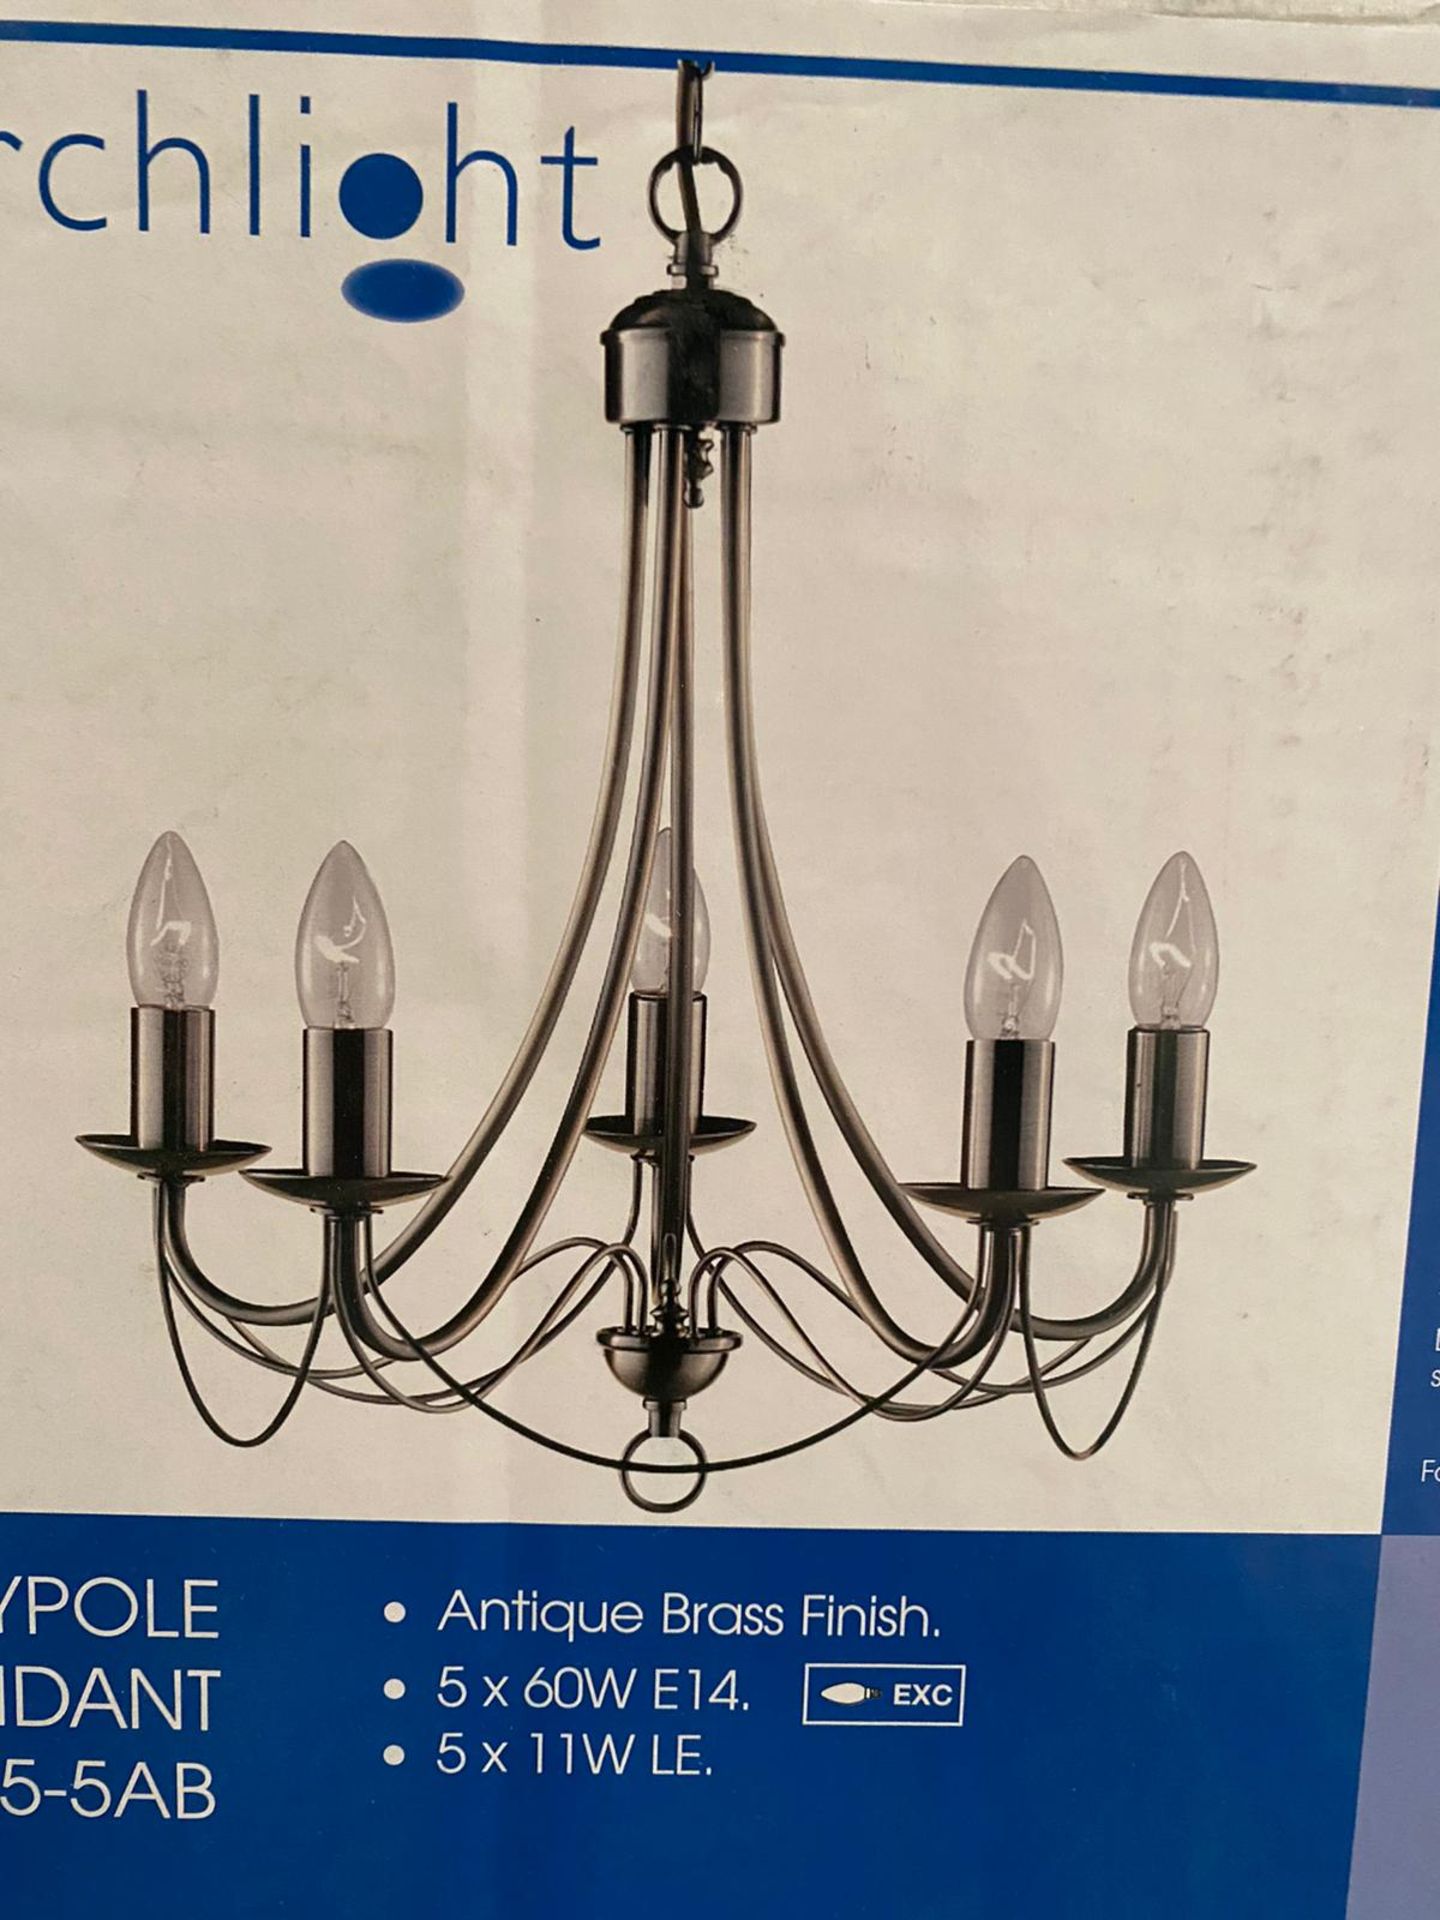 1 x Searchlight Maypole Pendant in Antique Brass- Ref: 6345-5AB - New and Boxed -RRP: £120 - Image 4 of 4